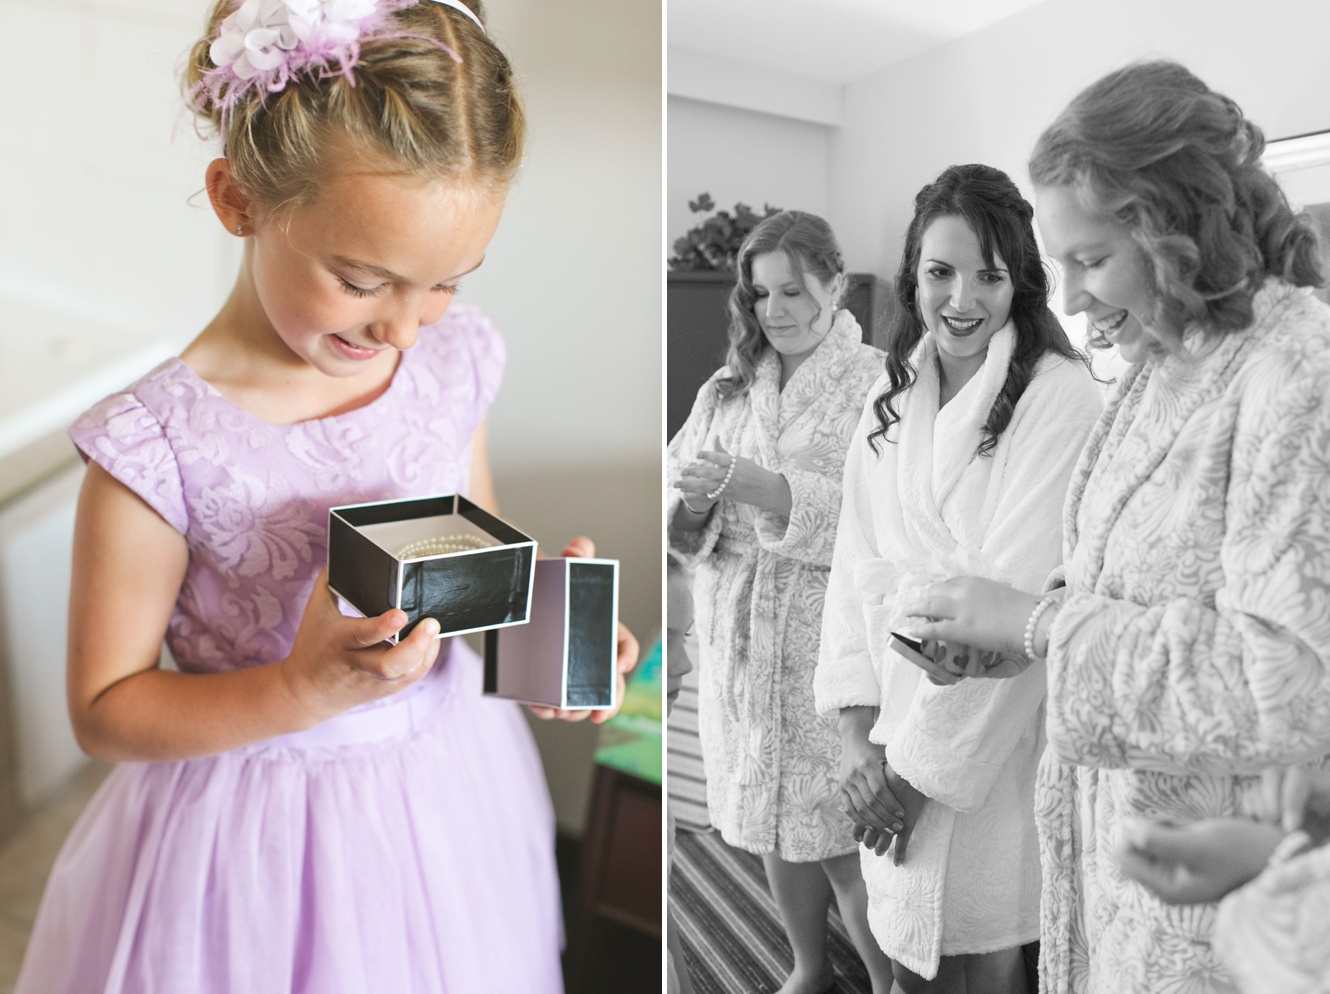 Giving gifts on your wedding day photo